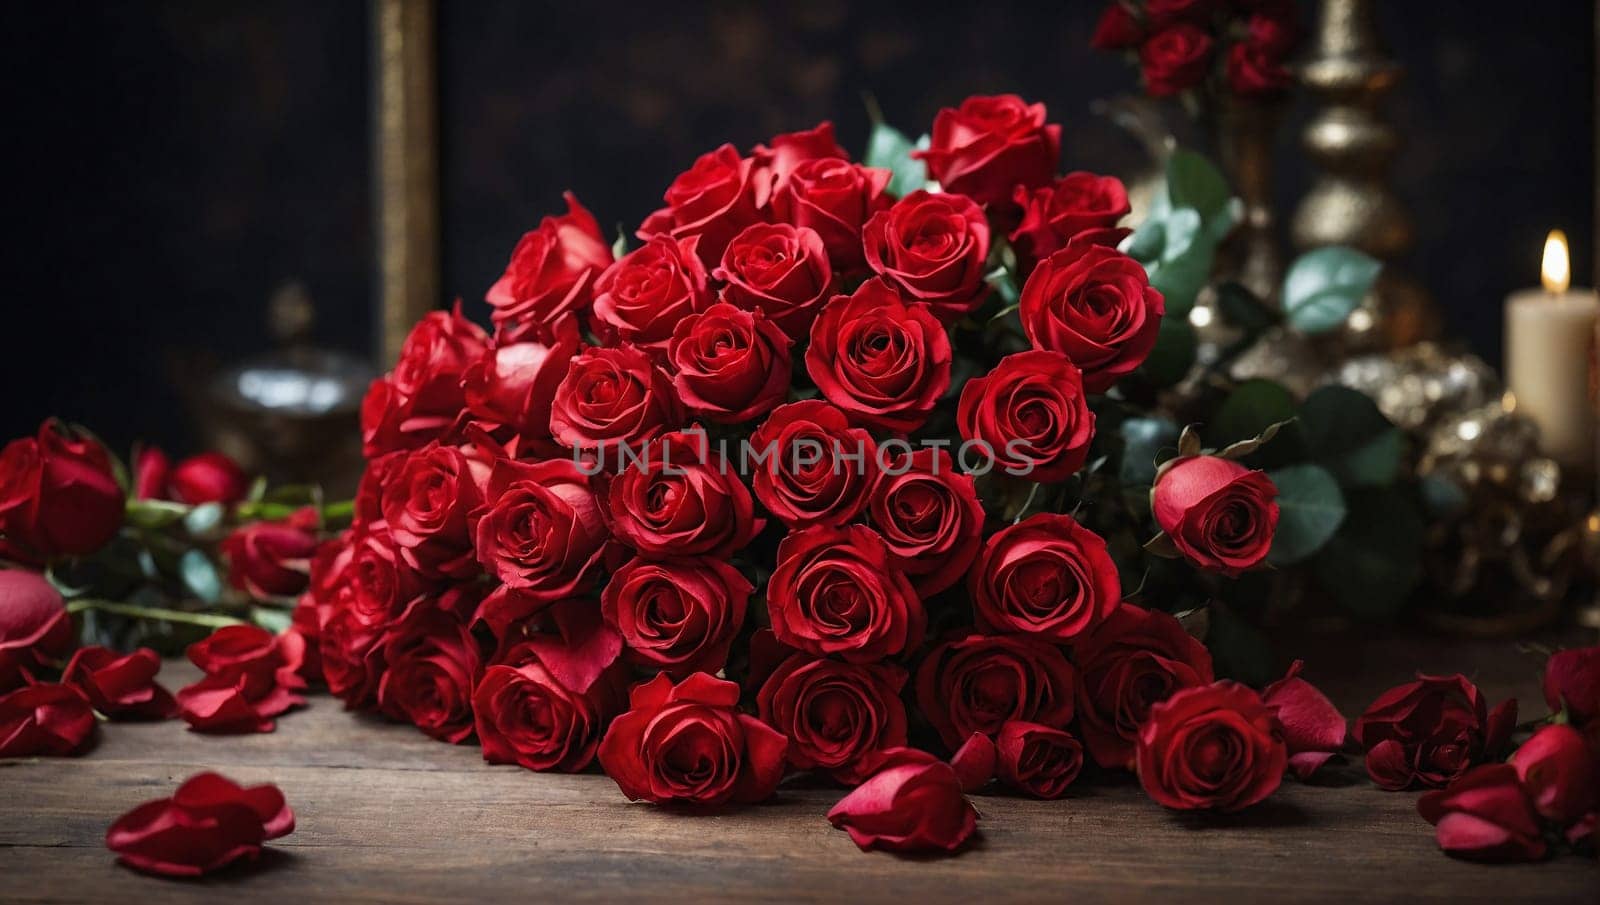 A collection of red roses arranged in a bunch and placed on a table.